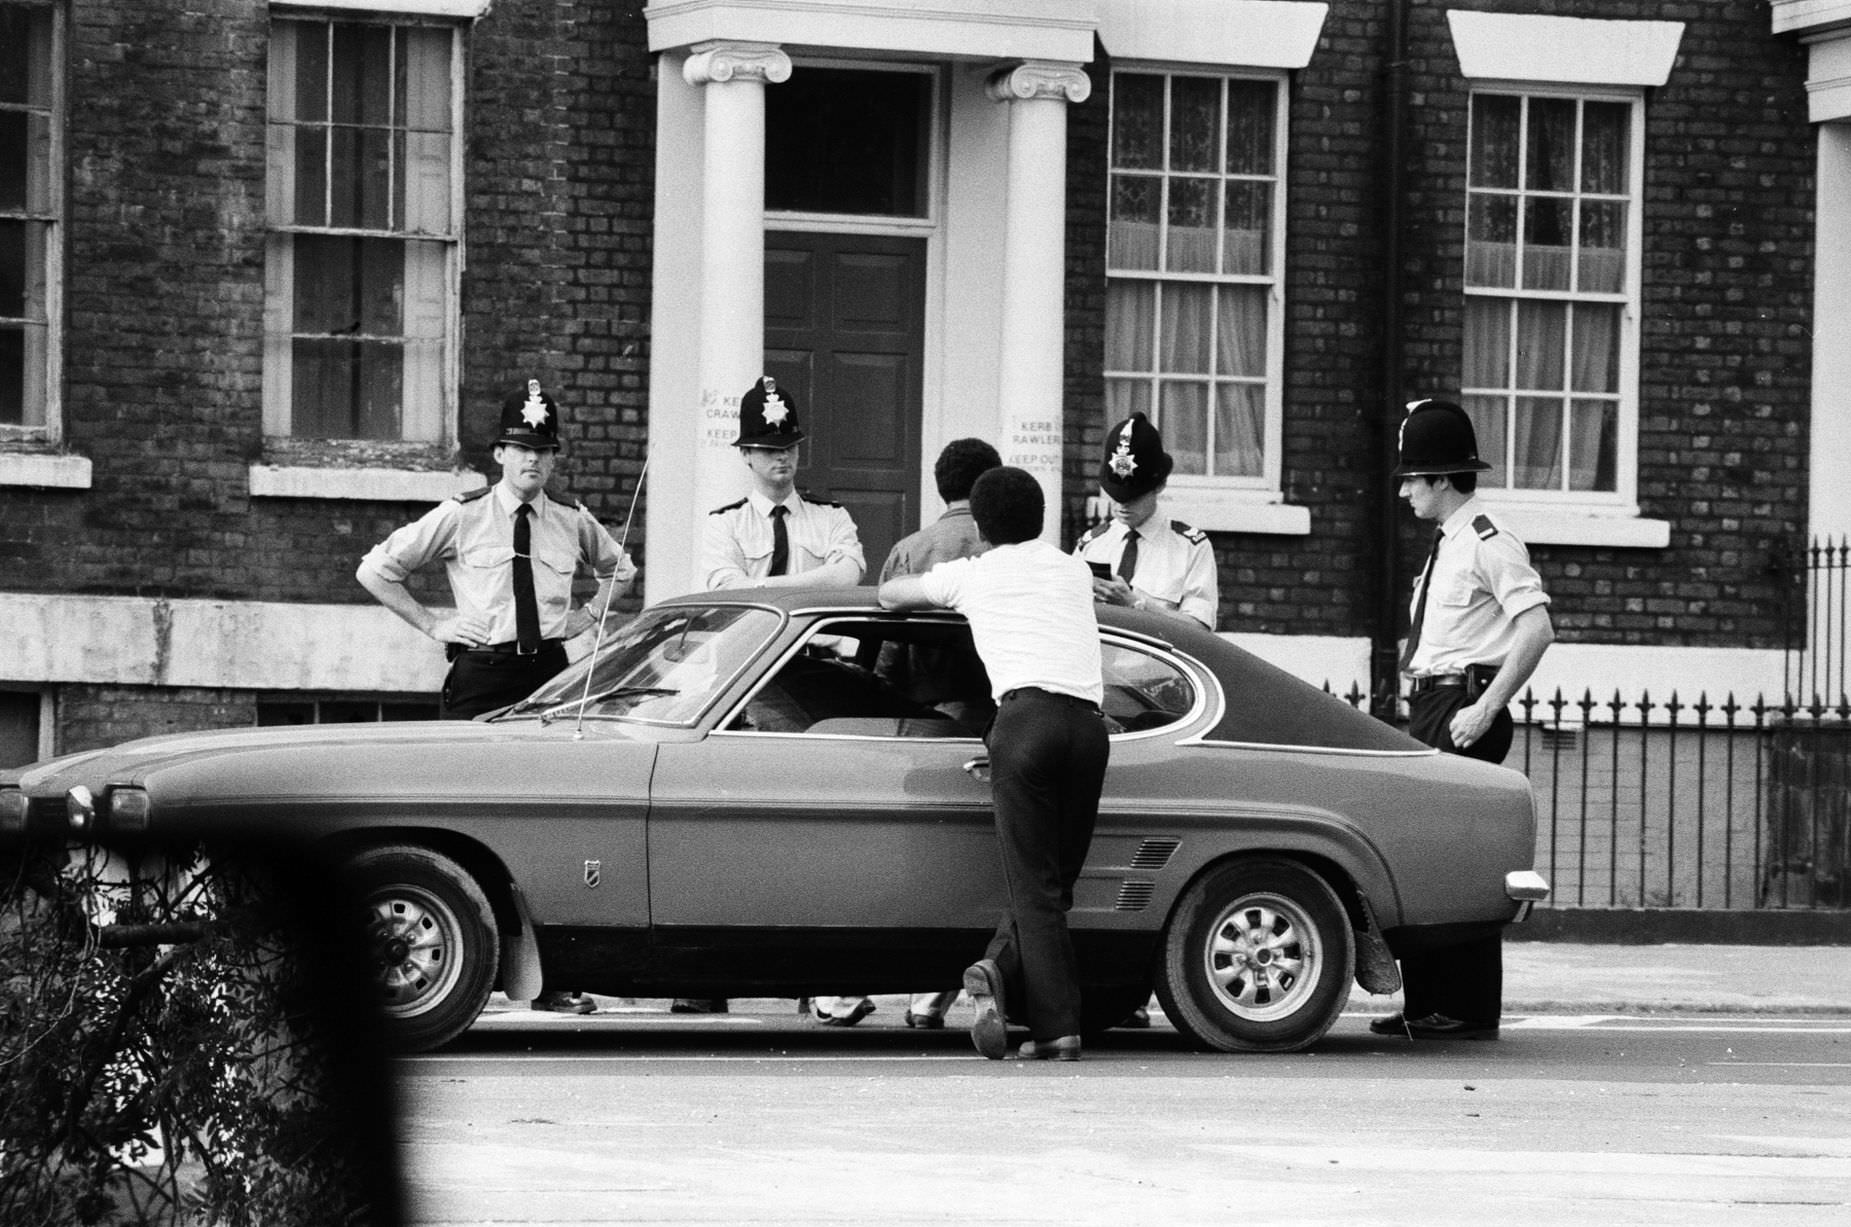 Life in Toxteth, Liverpool, is one of despair for the unemployed. Black youths are stopped and searched by Police a few days after the Toxteth riots, 9th July 1981